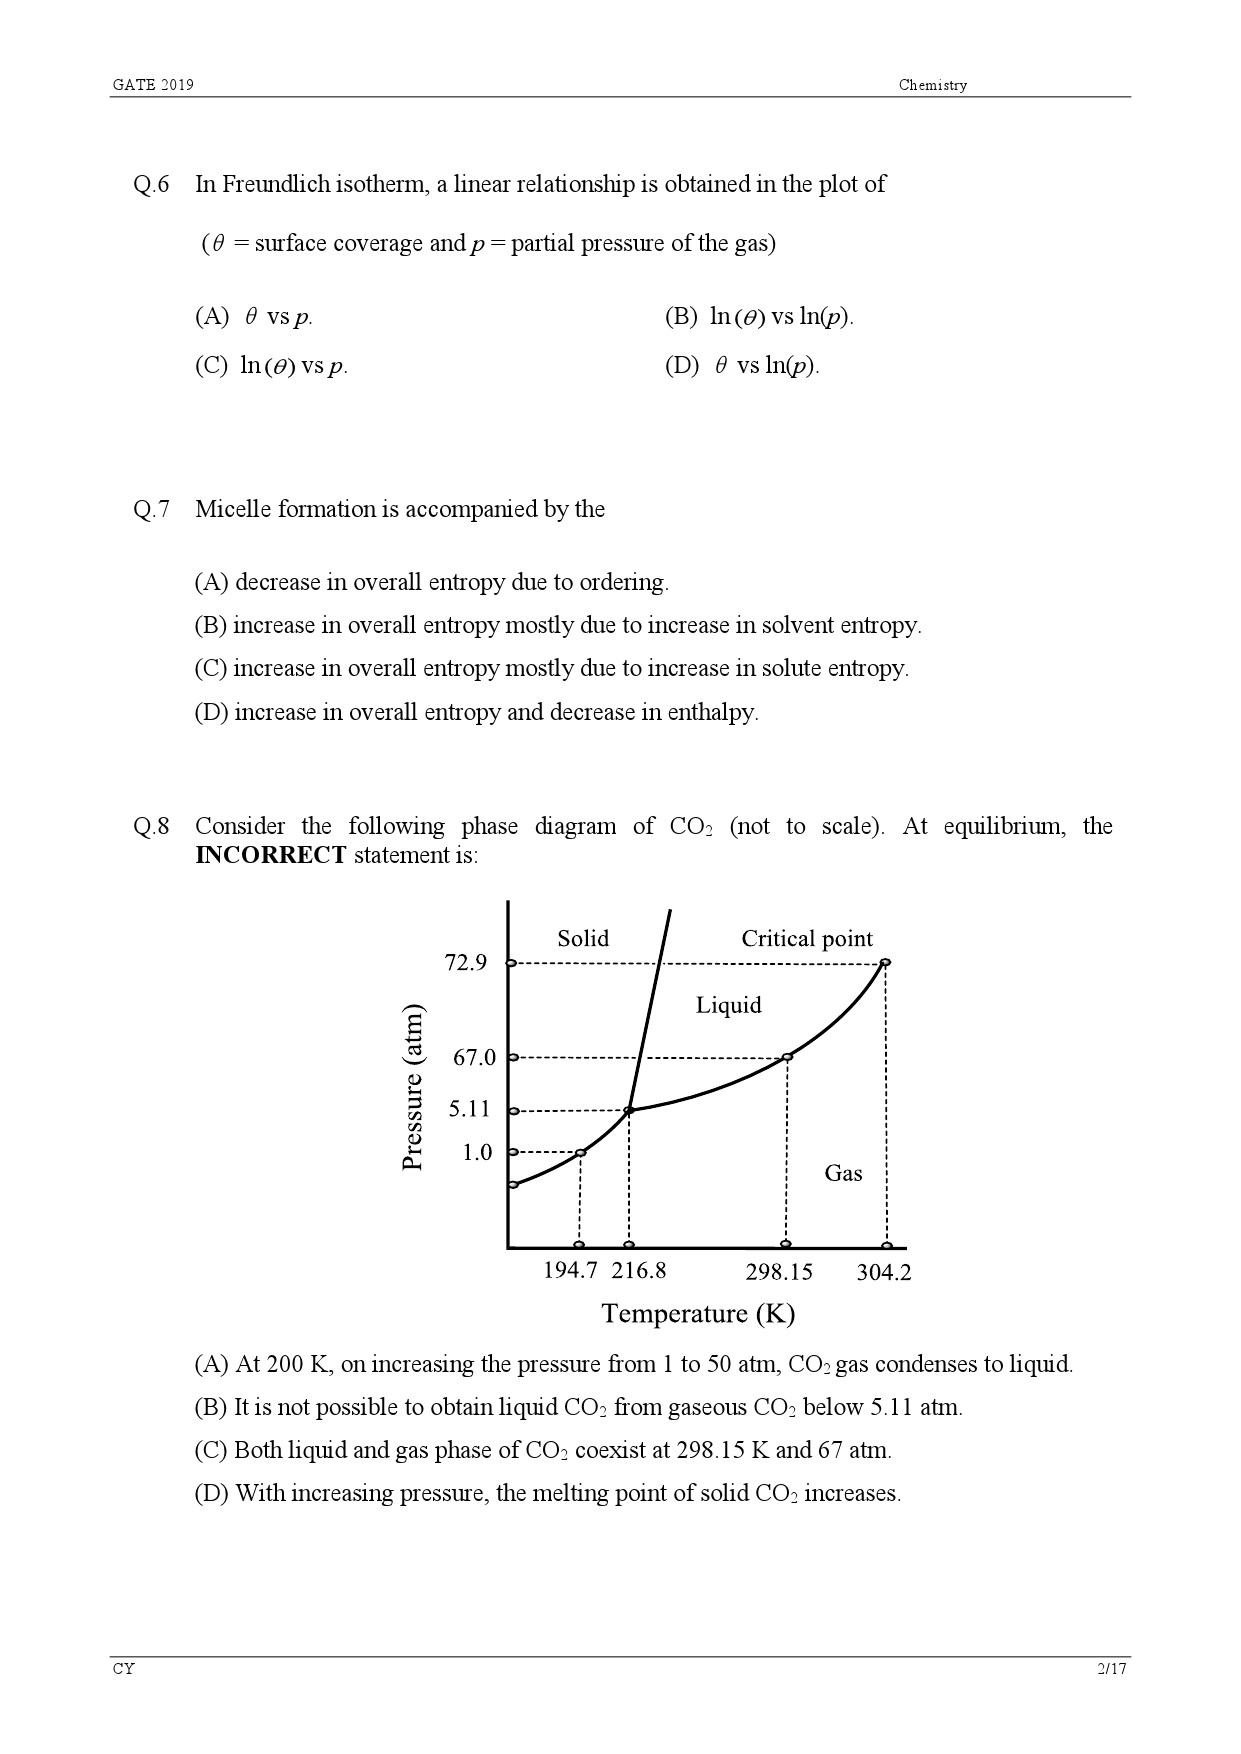 GATE Exam Question Paper 2019 Chemistry 5